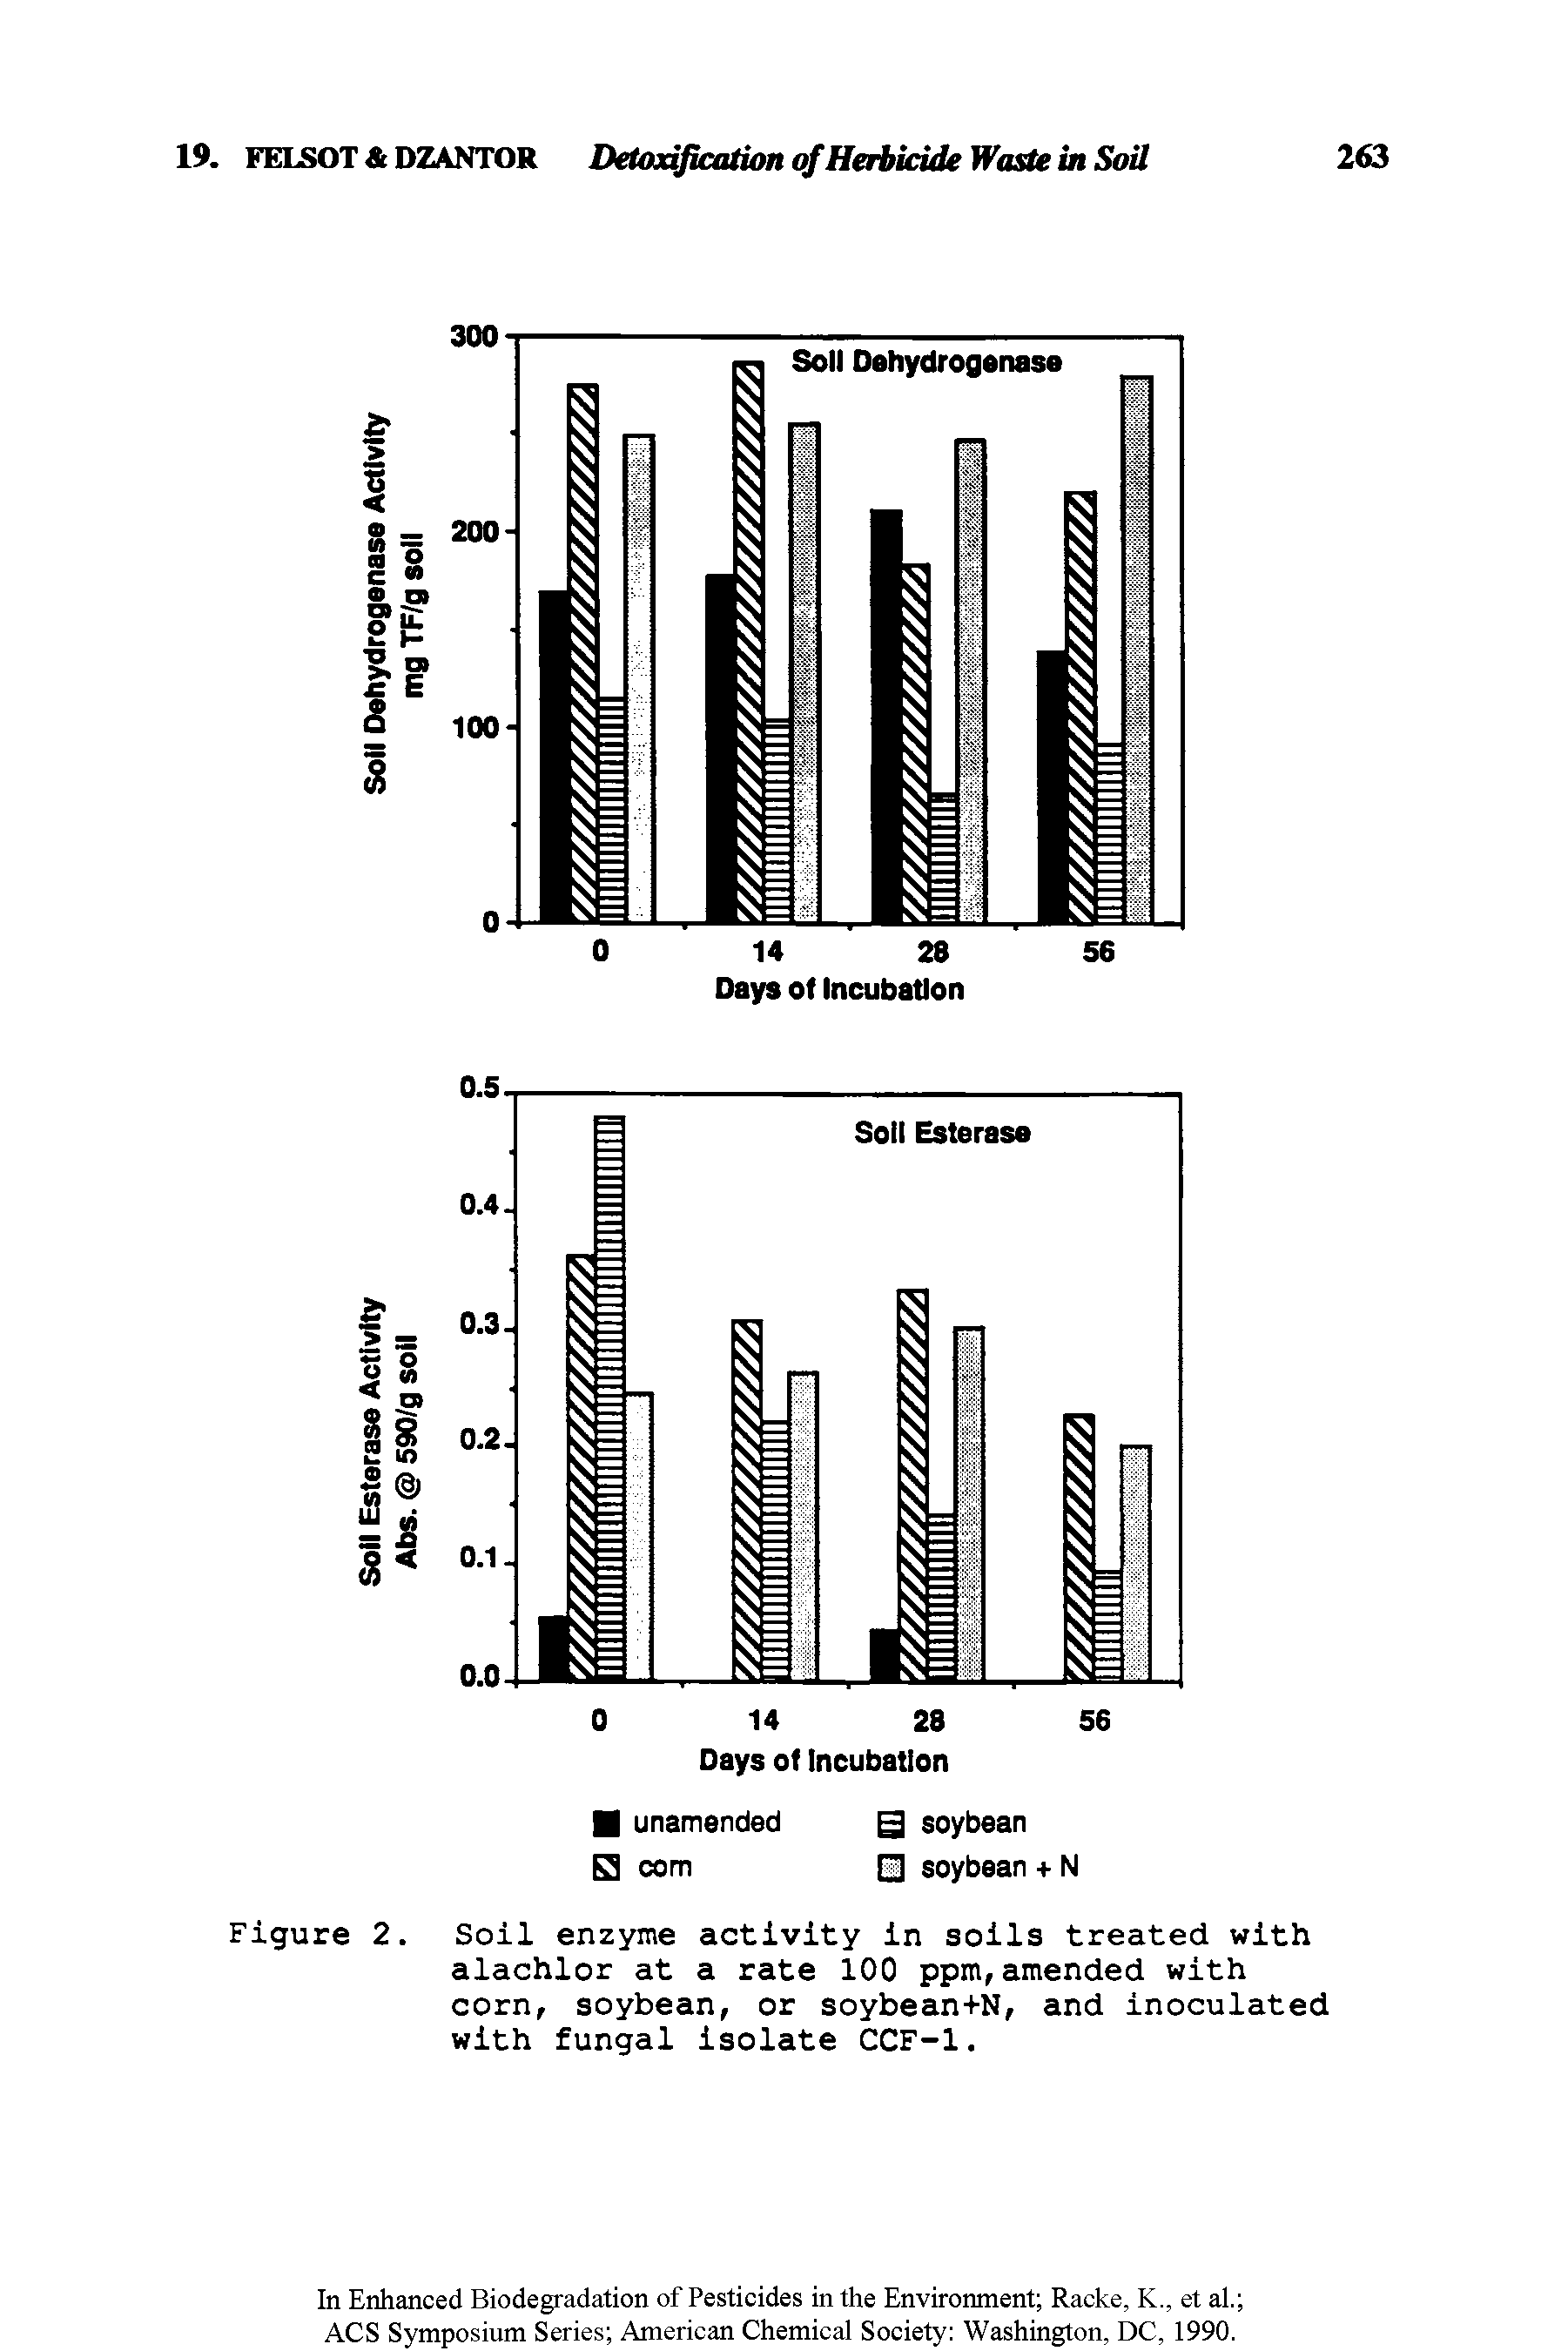 Figure 2. Soil enzyme activity in soils treated with alachlor at a rate 100 ppm,amended with corn, soybean, or soybean+N, and inoculated with fungal isolate CCF-1.